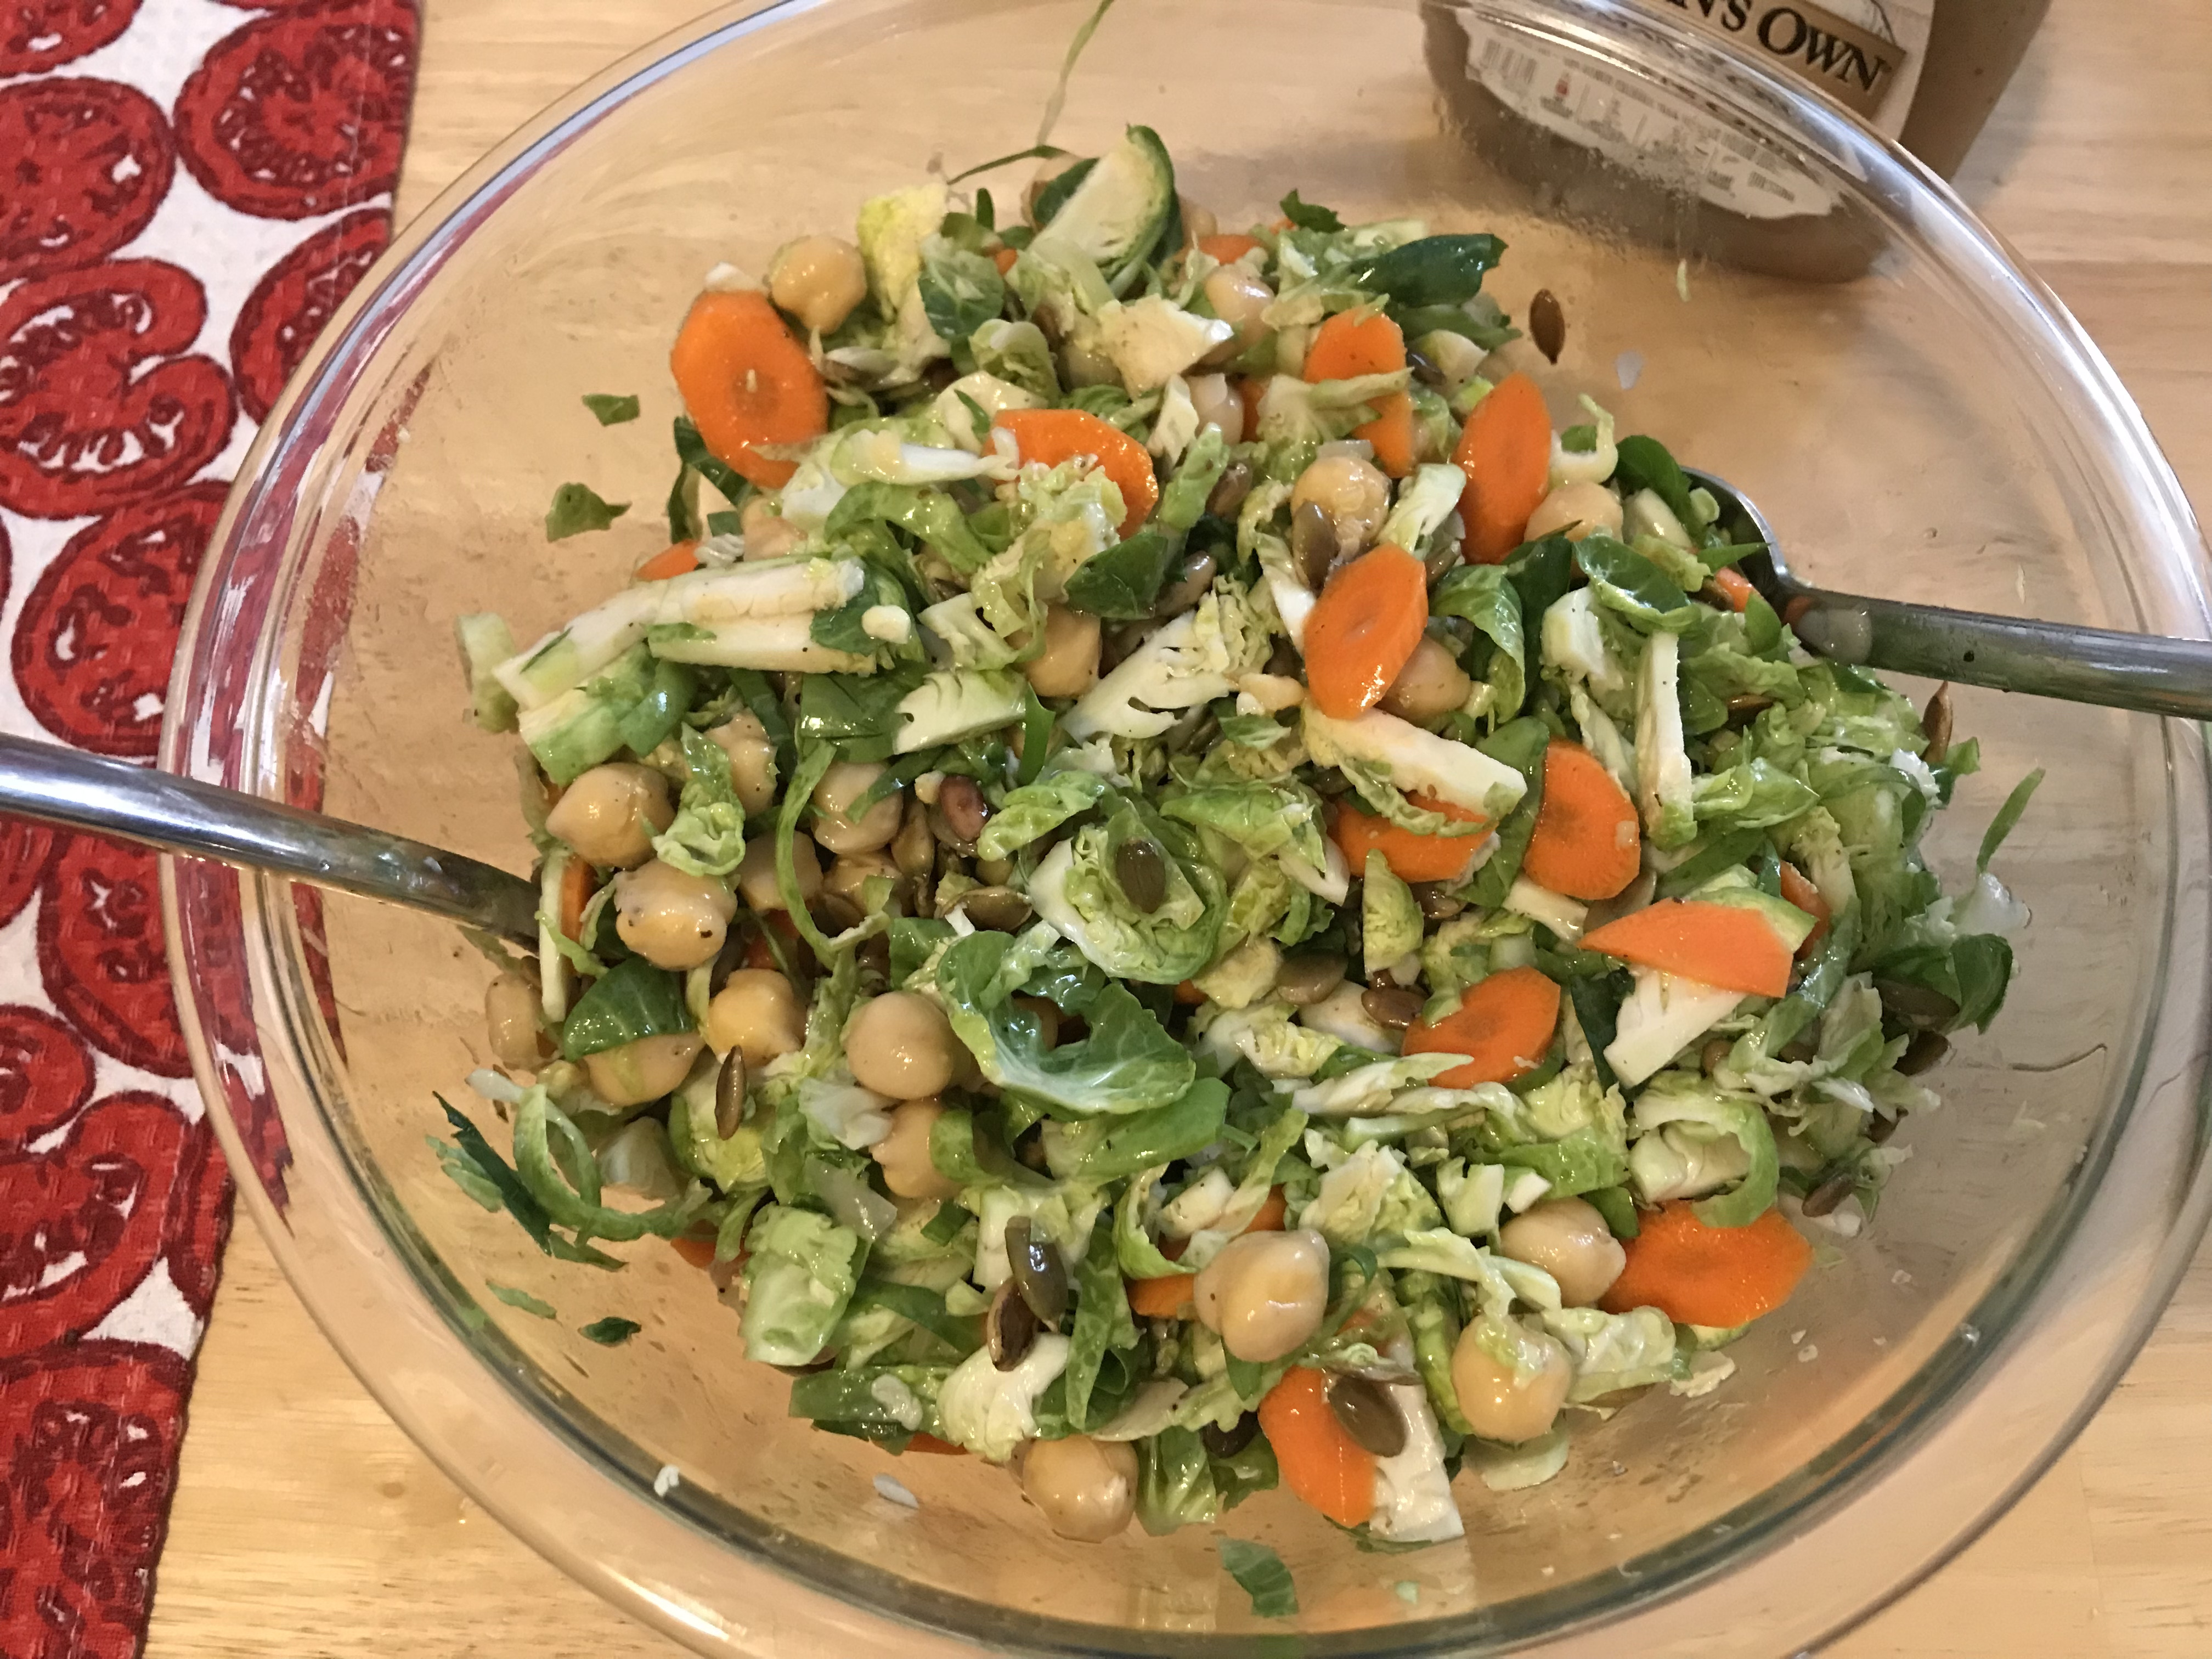 raw brussels sprouts salad with carrots and chickpeas